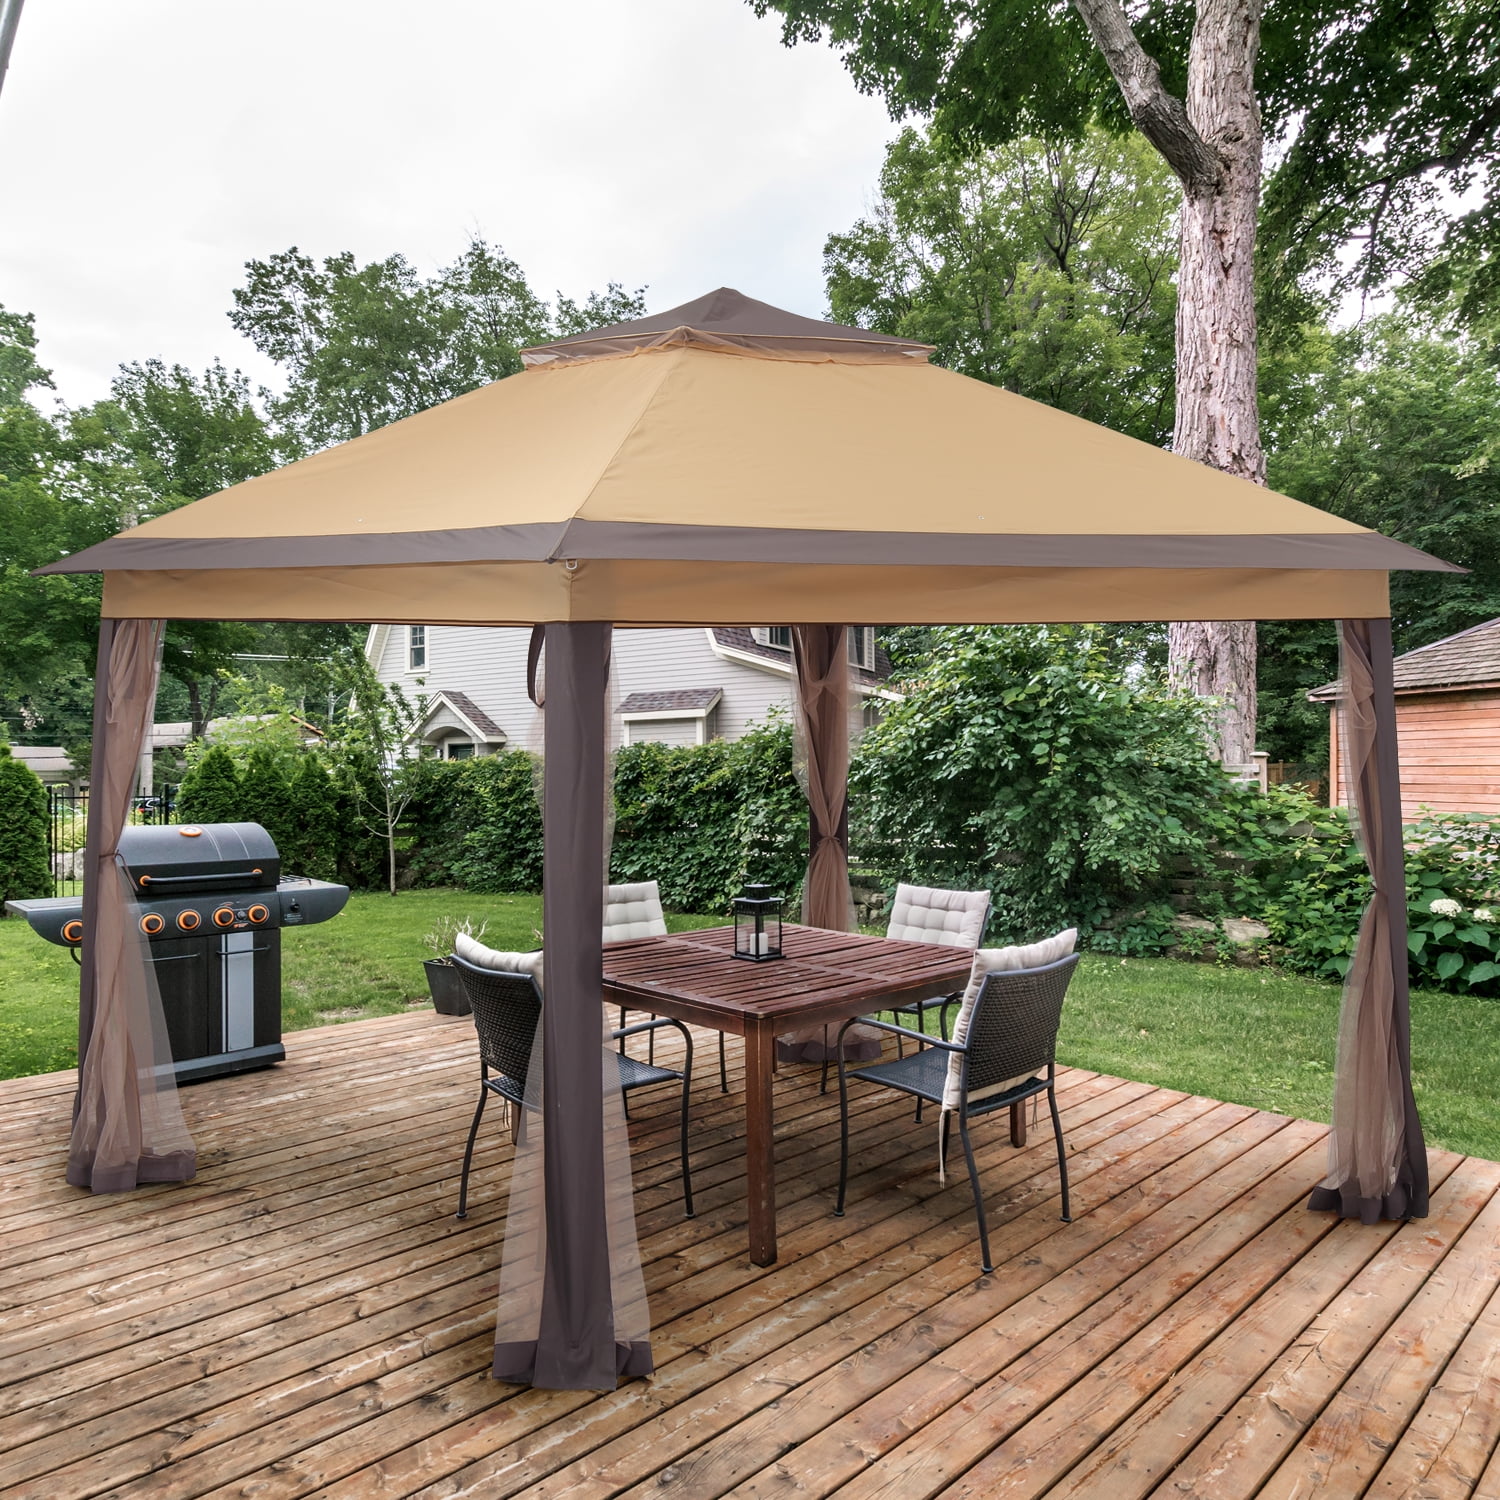 Details about   Outdoor Gazebo Brown Pop Up Patio Canopy 11 x 11Ft Mosquito Netting Panels Steel 